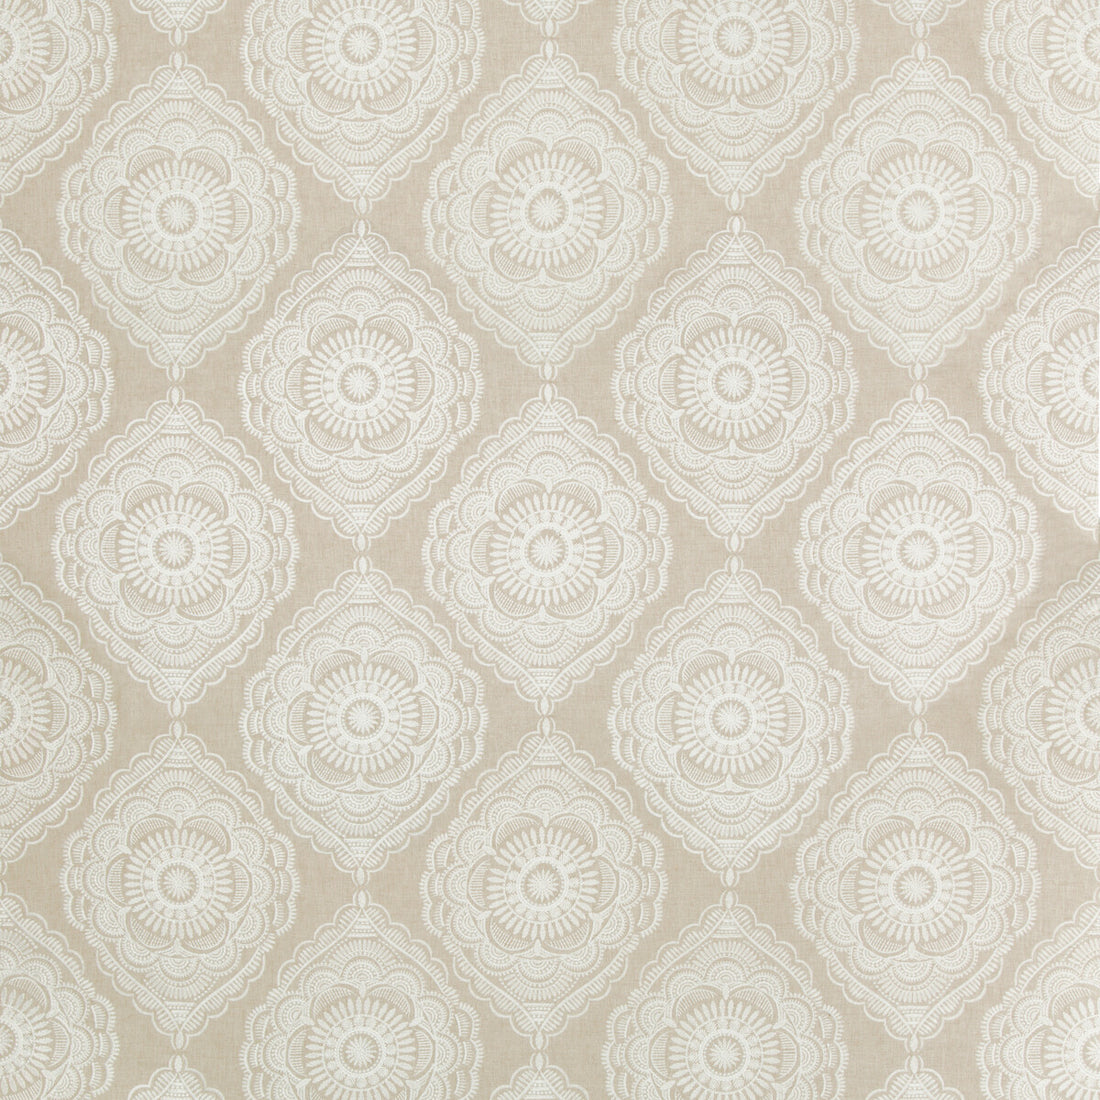 Monterey Emb fabric in bluff color - pattern 2017170.1.0 - by Lee Jofa in the Westport collection